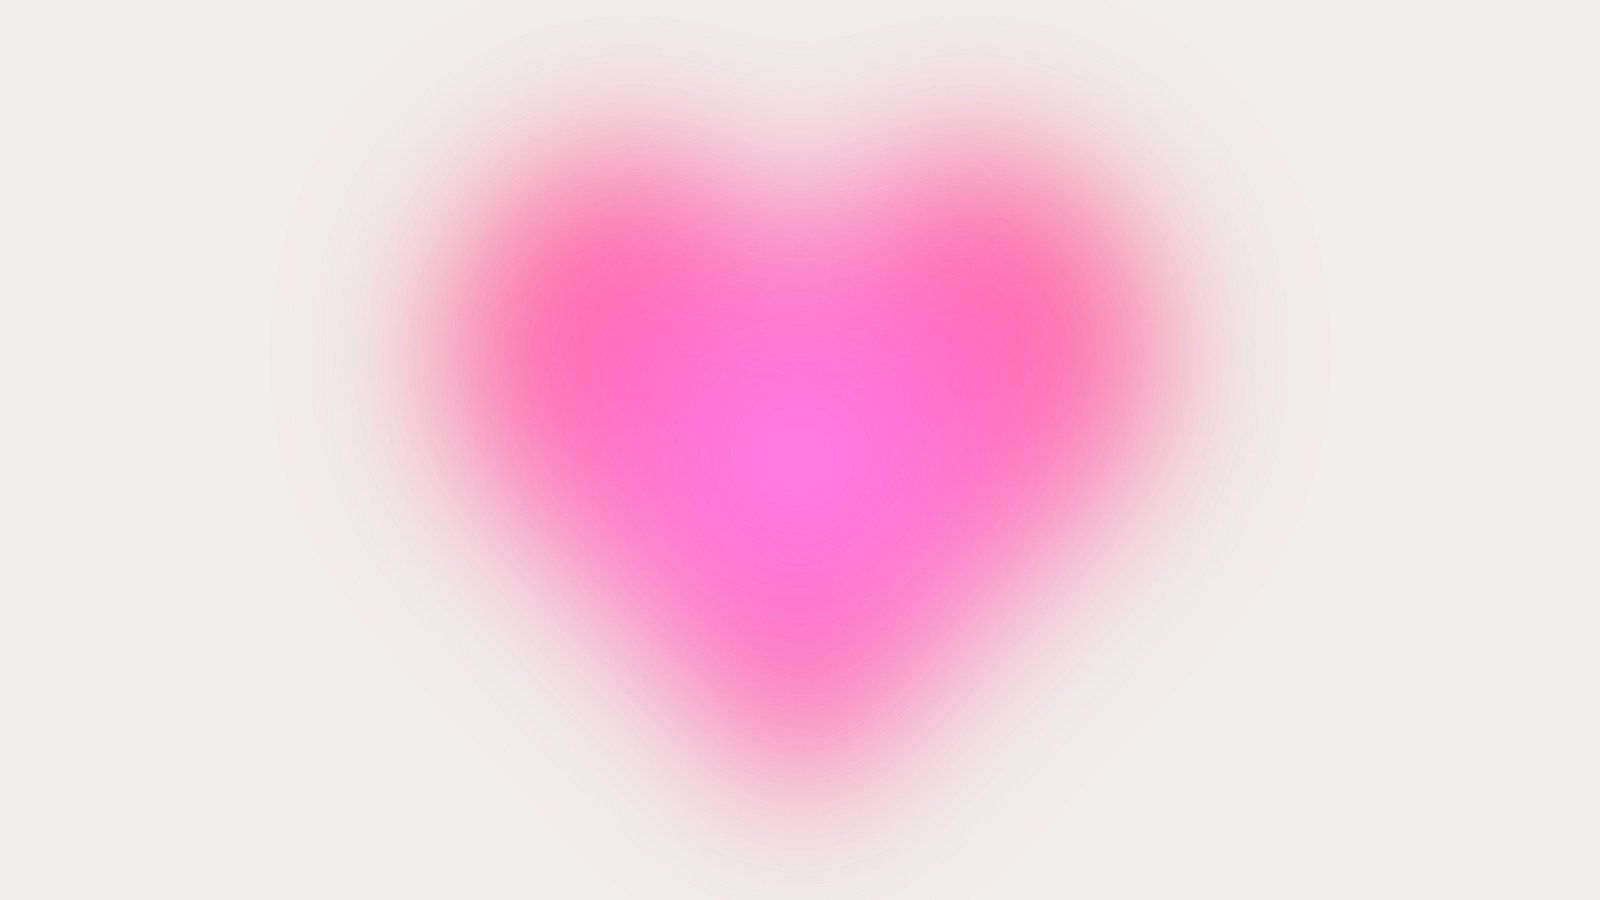 A pink heart on a white background - Heart, pink heart